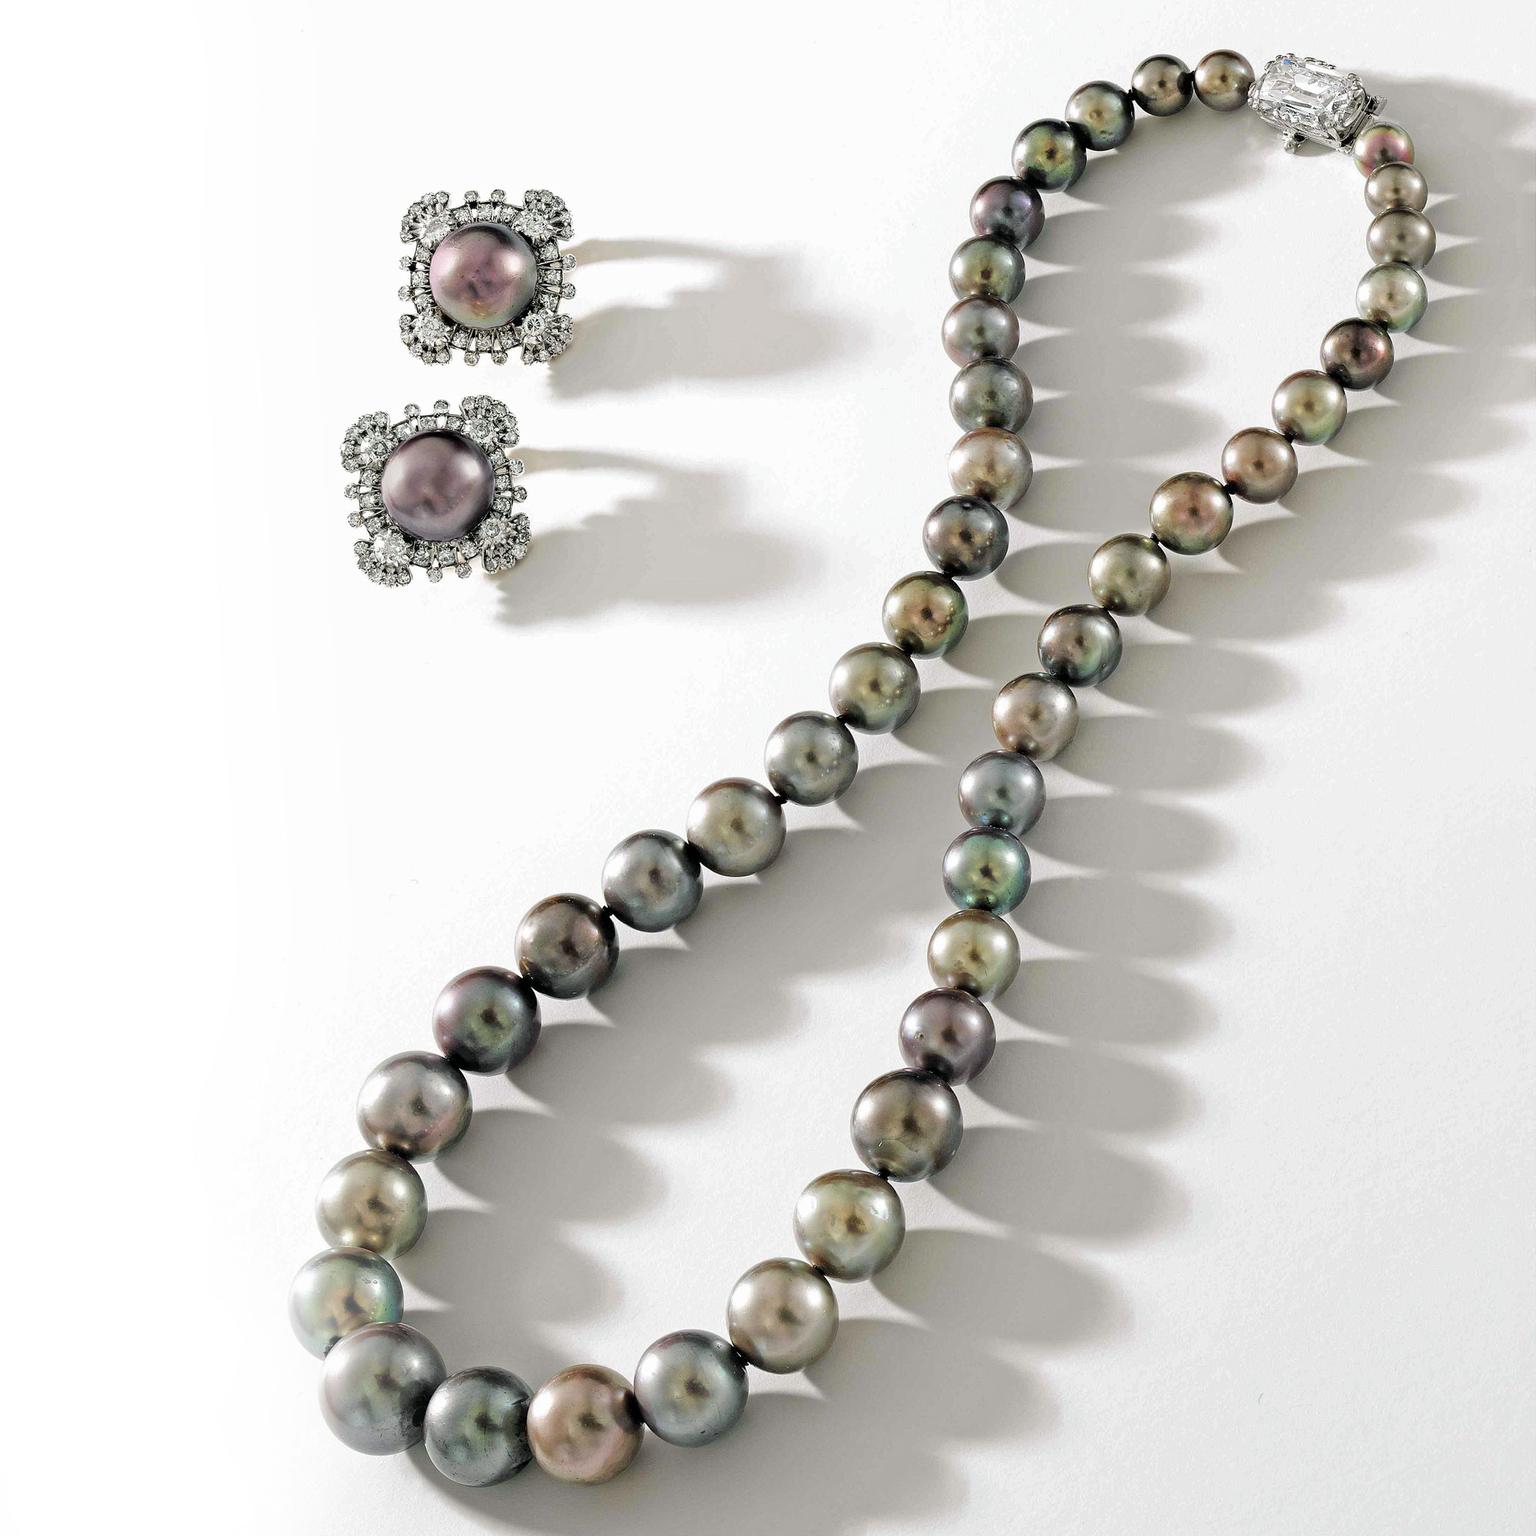 Cowdray Pearls earrings and necklace